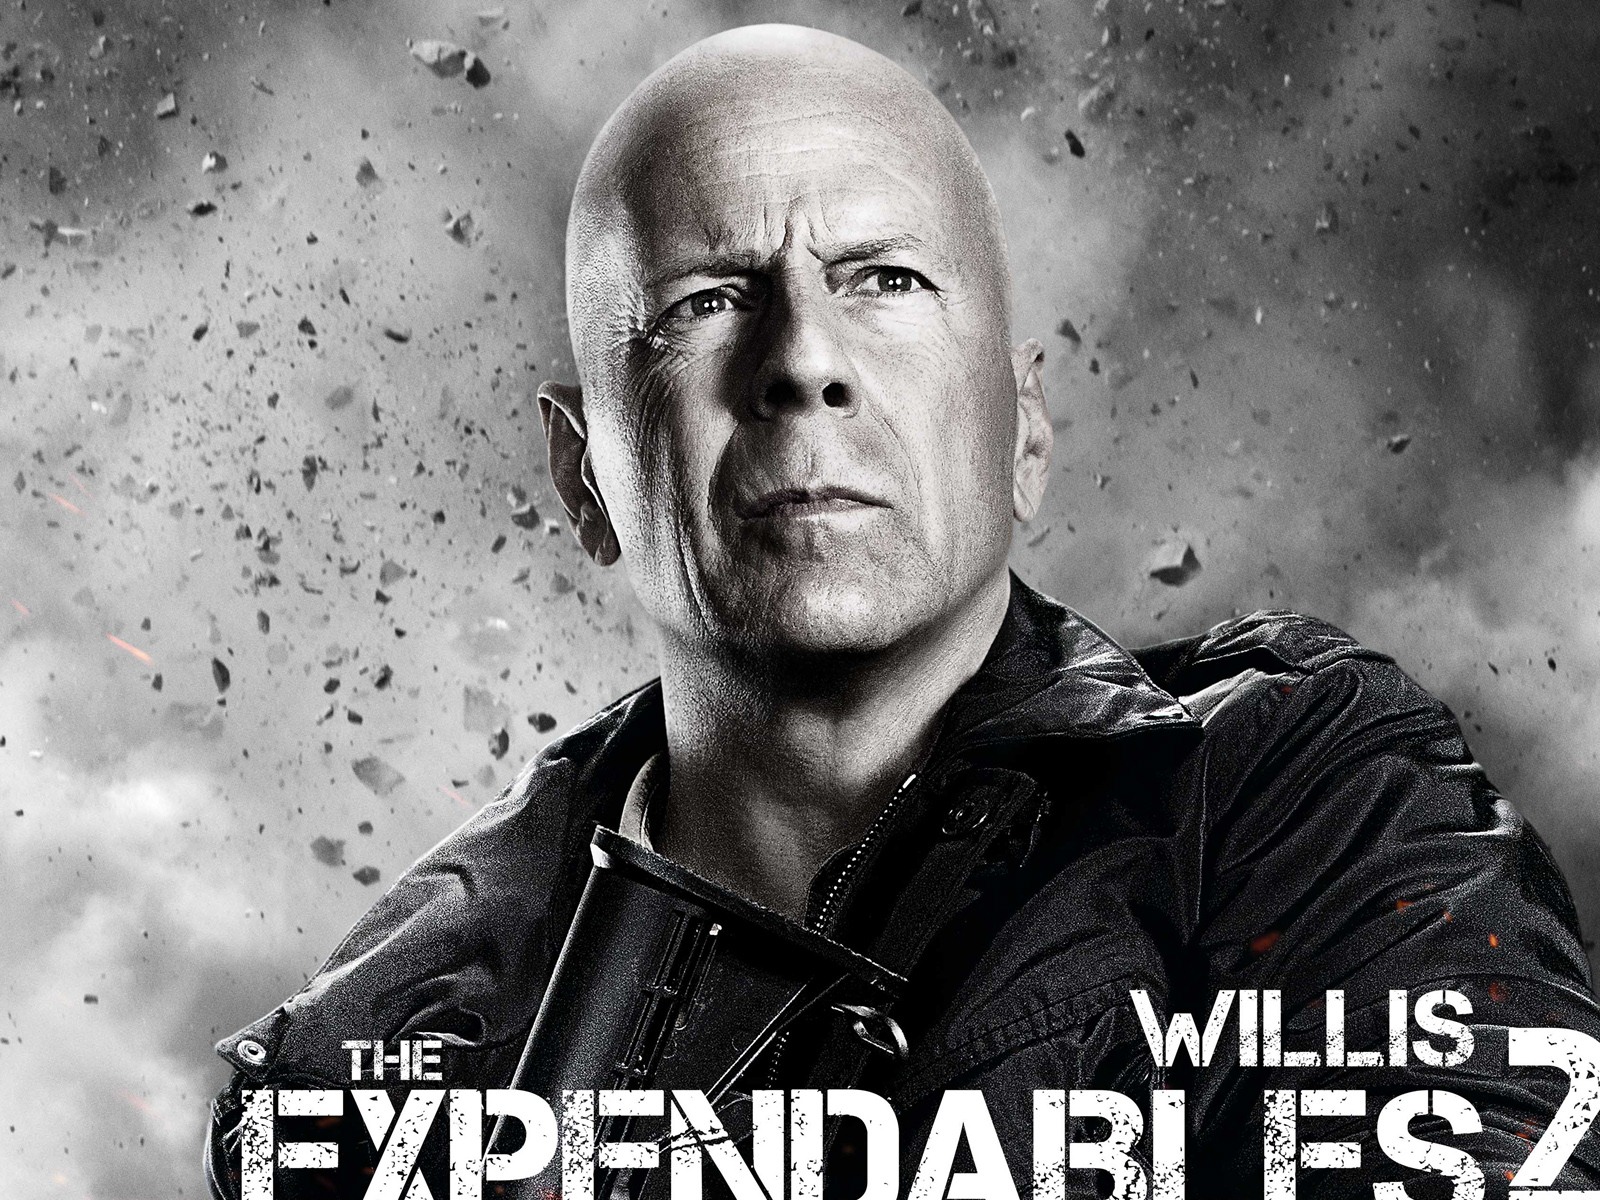 2012 Expendables2 HDの壁紙 #12 - 1600x1200